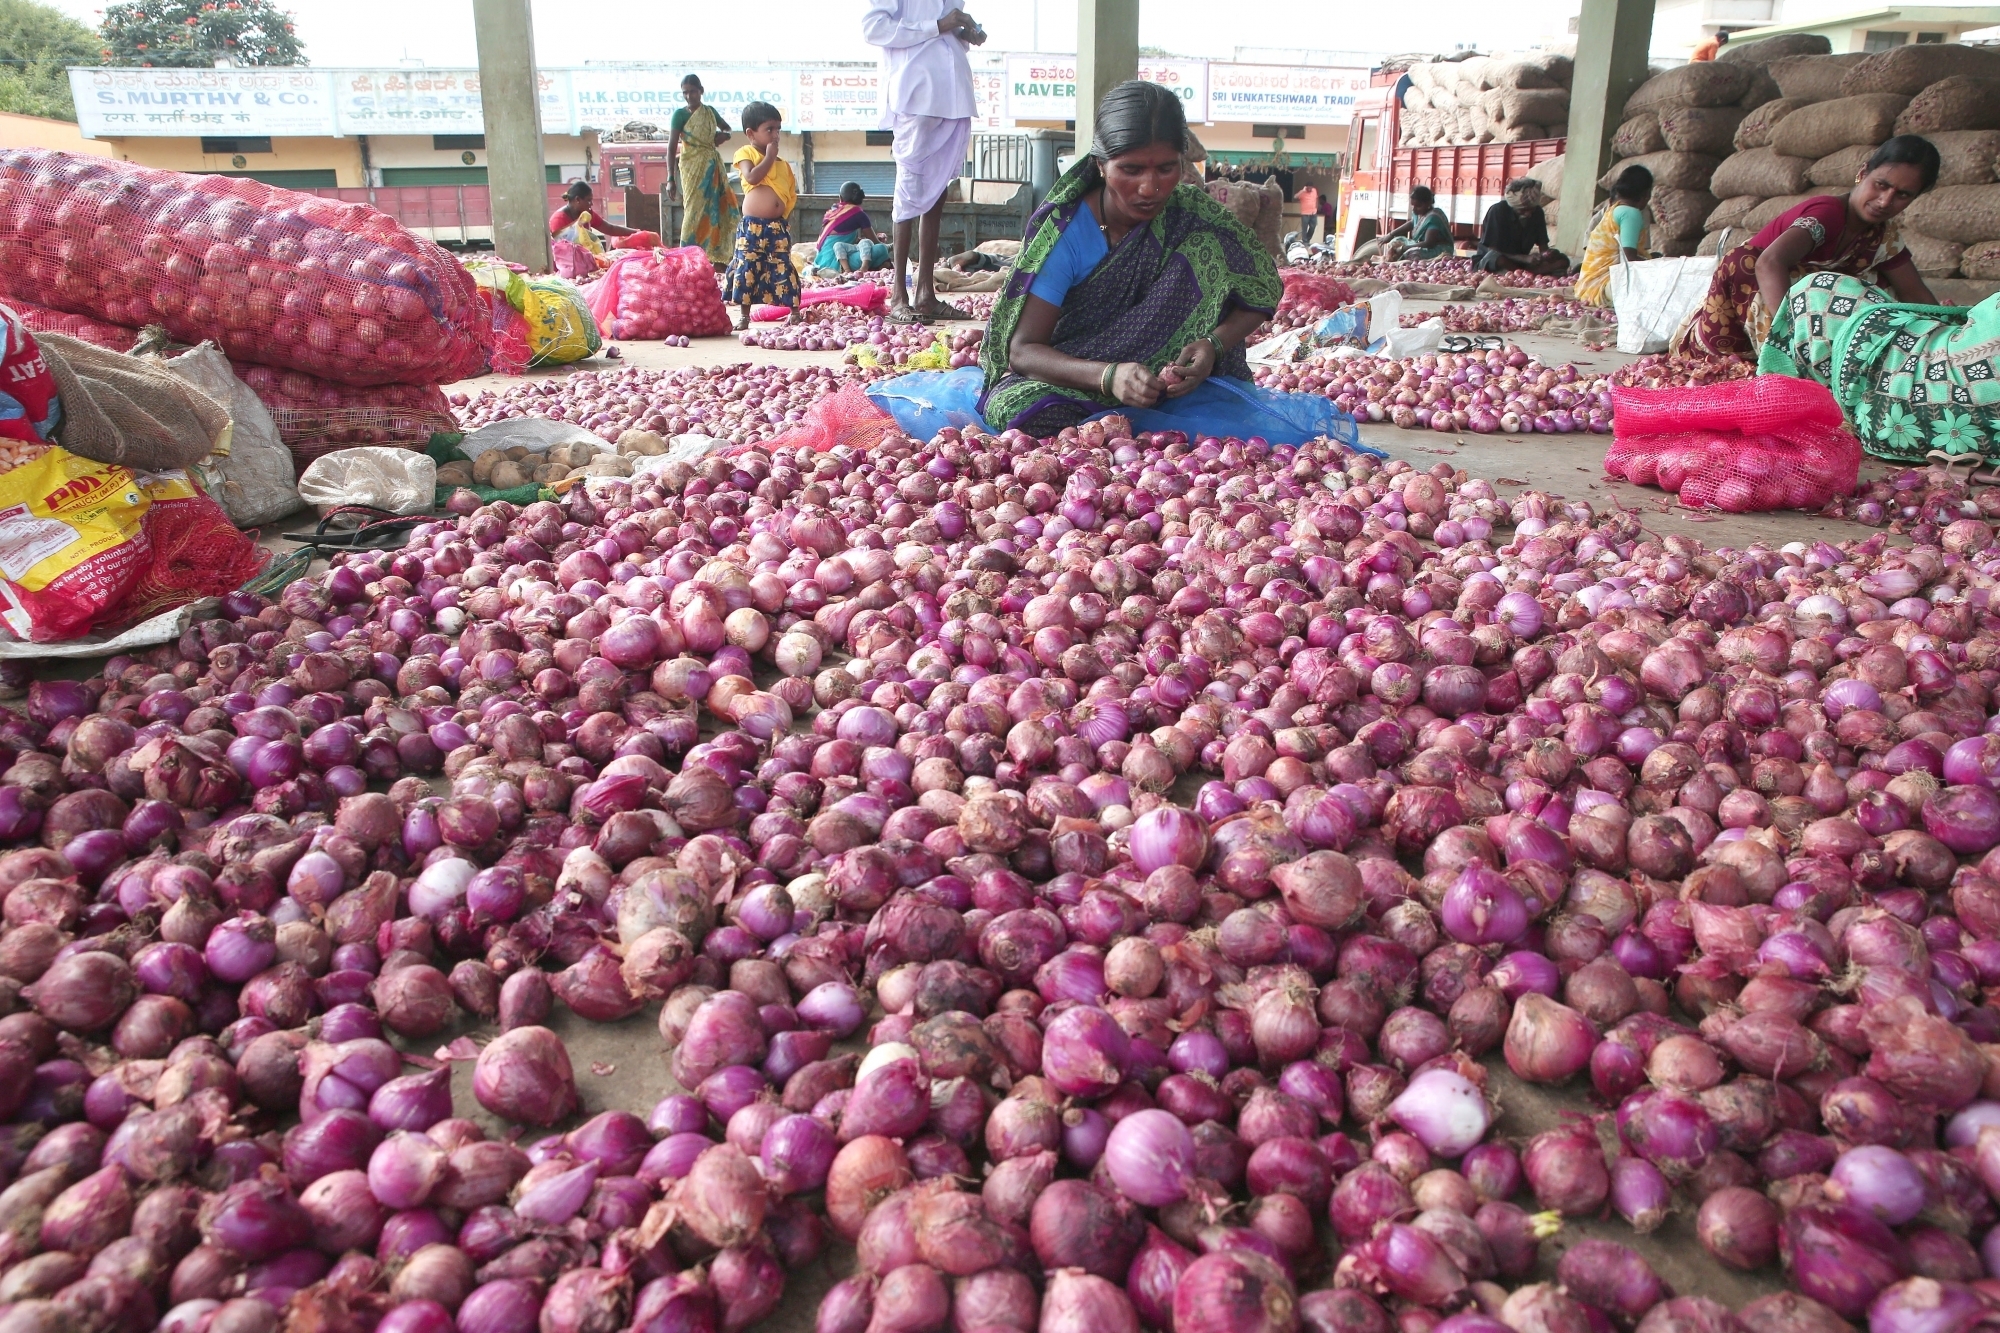 Onion 4 times expensive in a year, 2000 tonnes consumption in Delhi